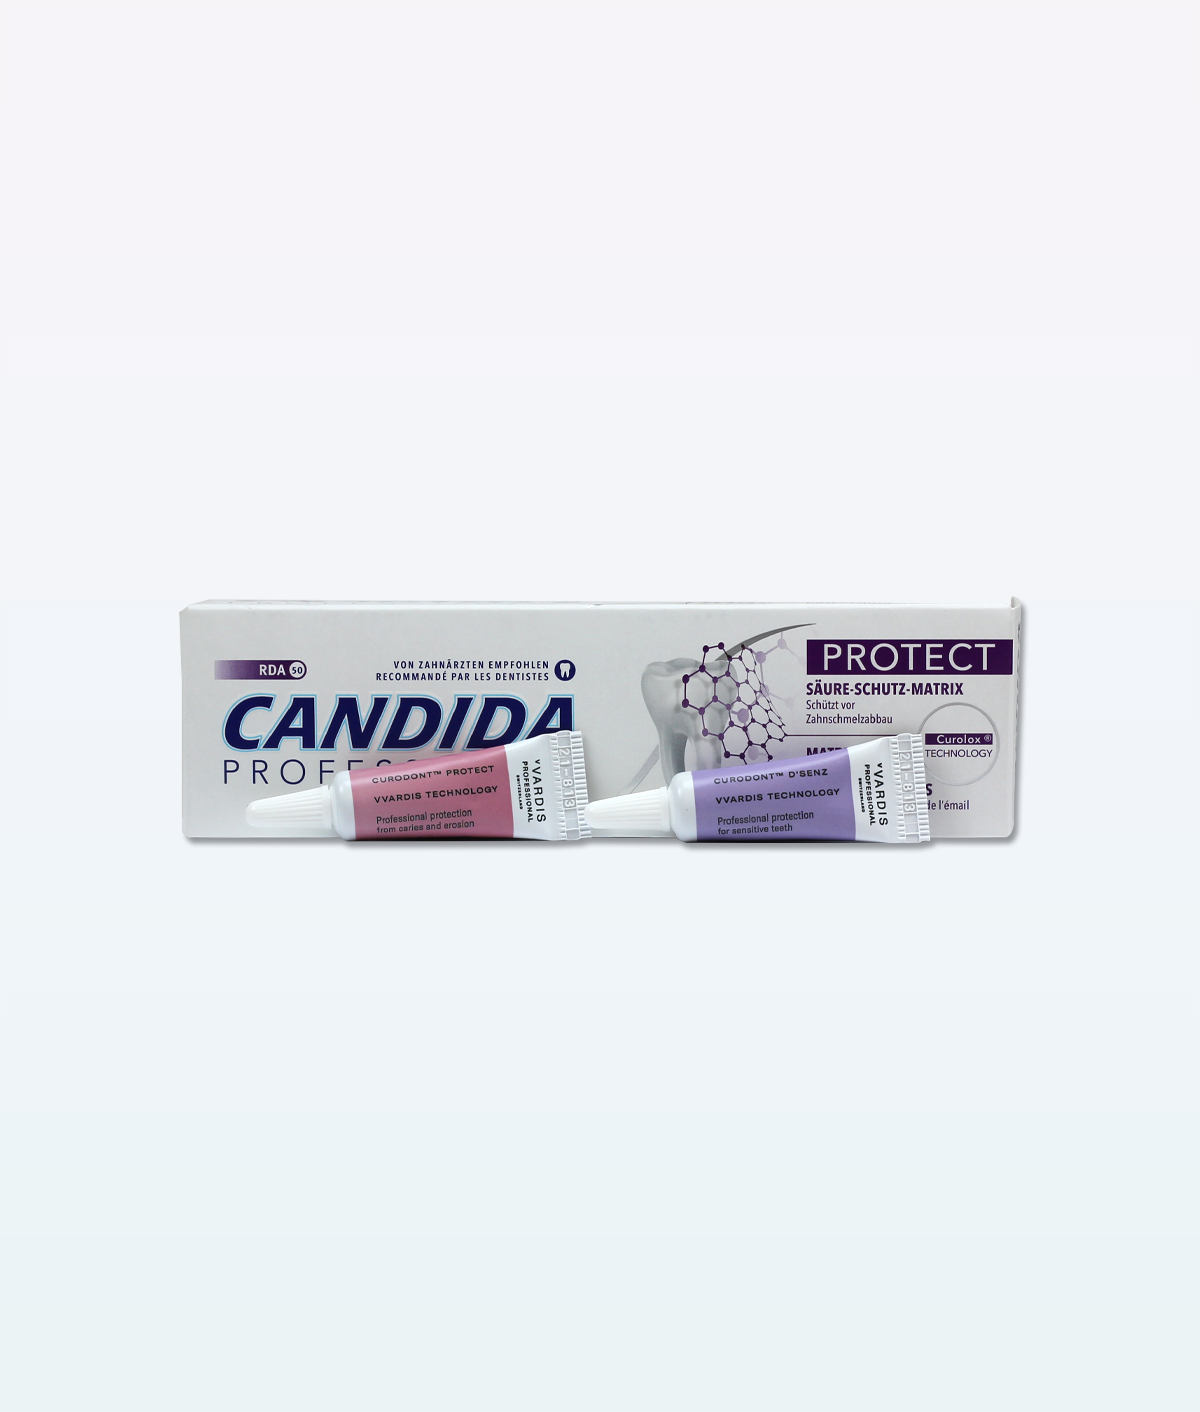 Curodont Tooth Gels & Candida Professional Protect